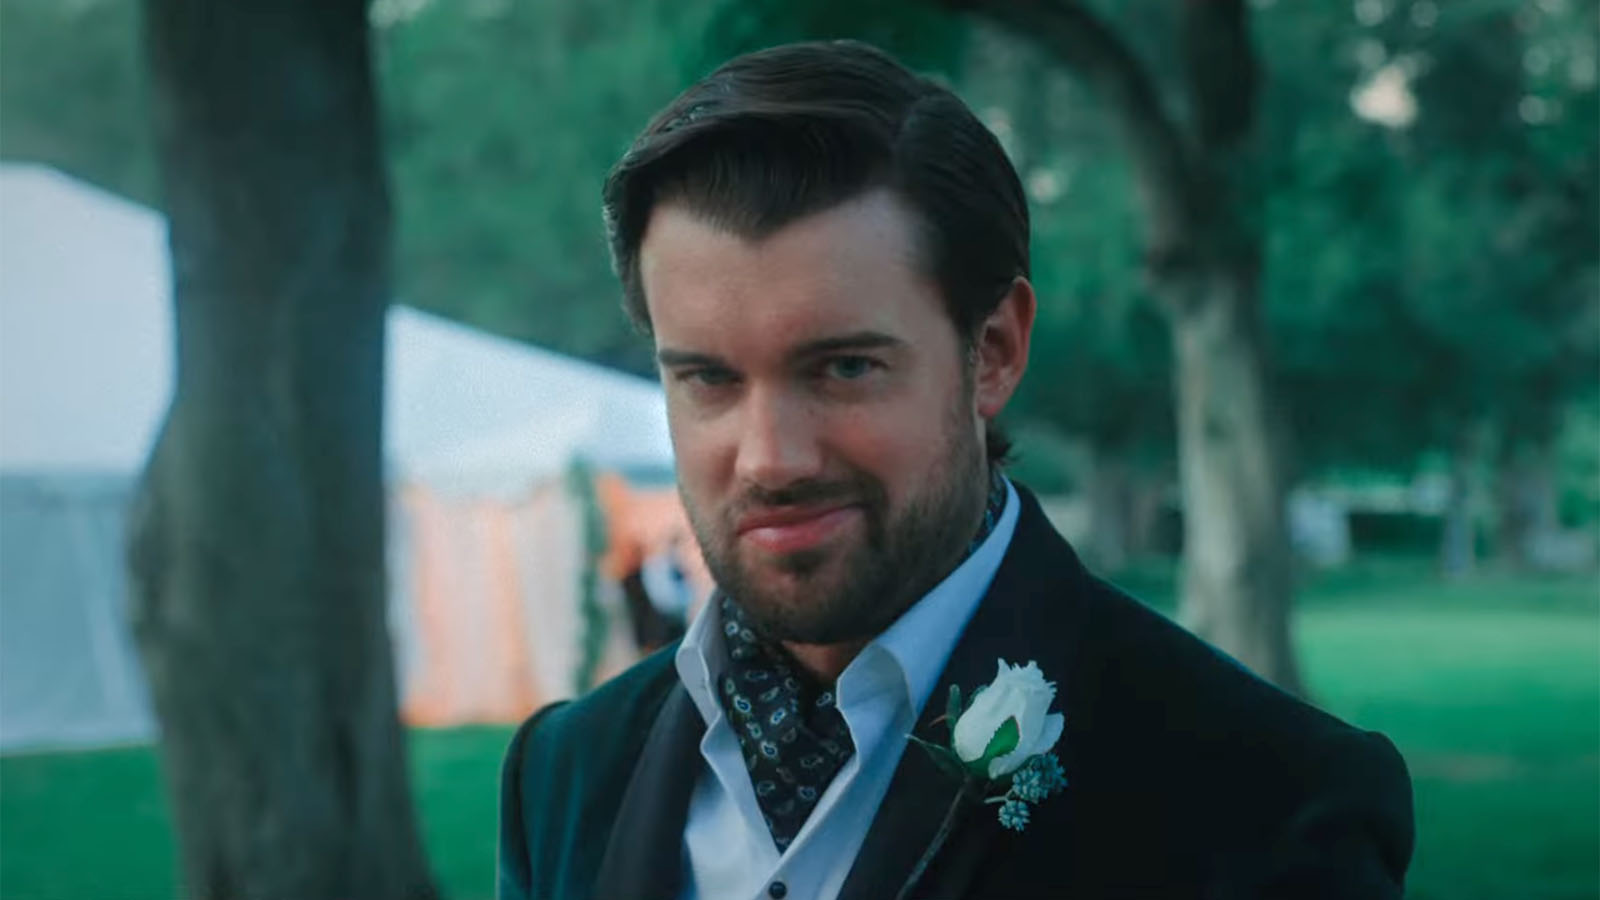 Jack Whitehall plays Sebastian, shown here leaning into his raffish side. 